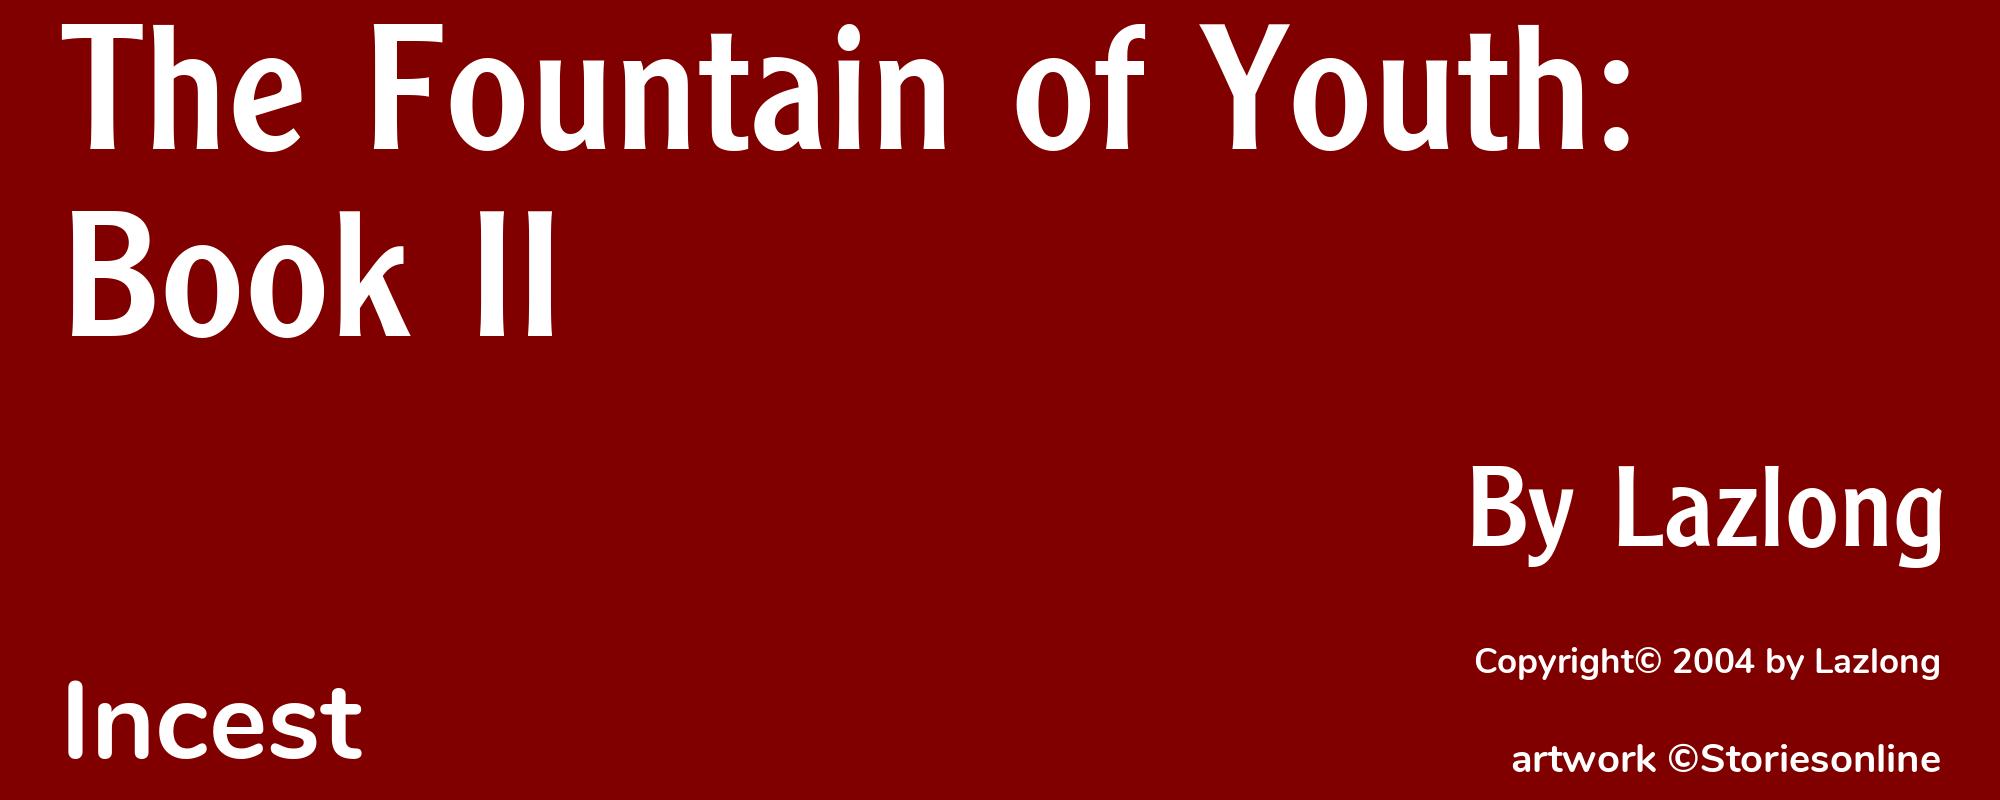 The Fountain of Youth: Book II - Cover